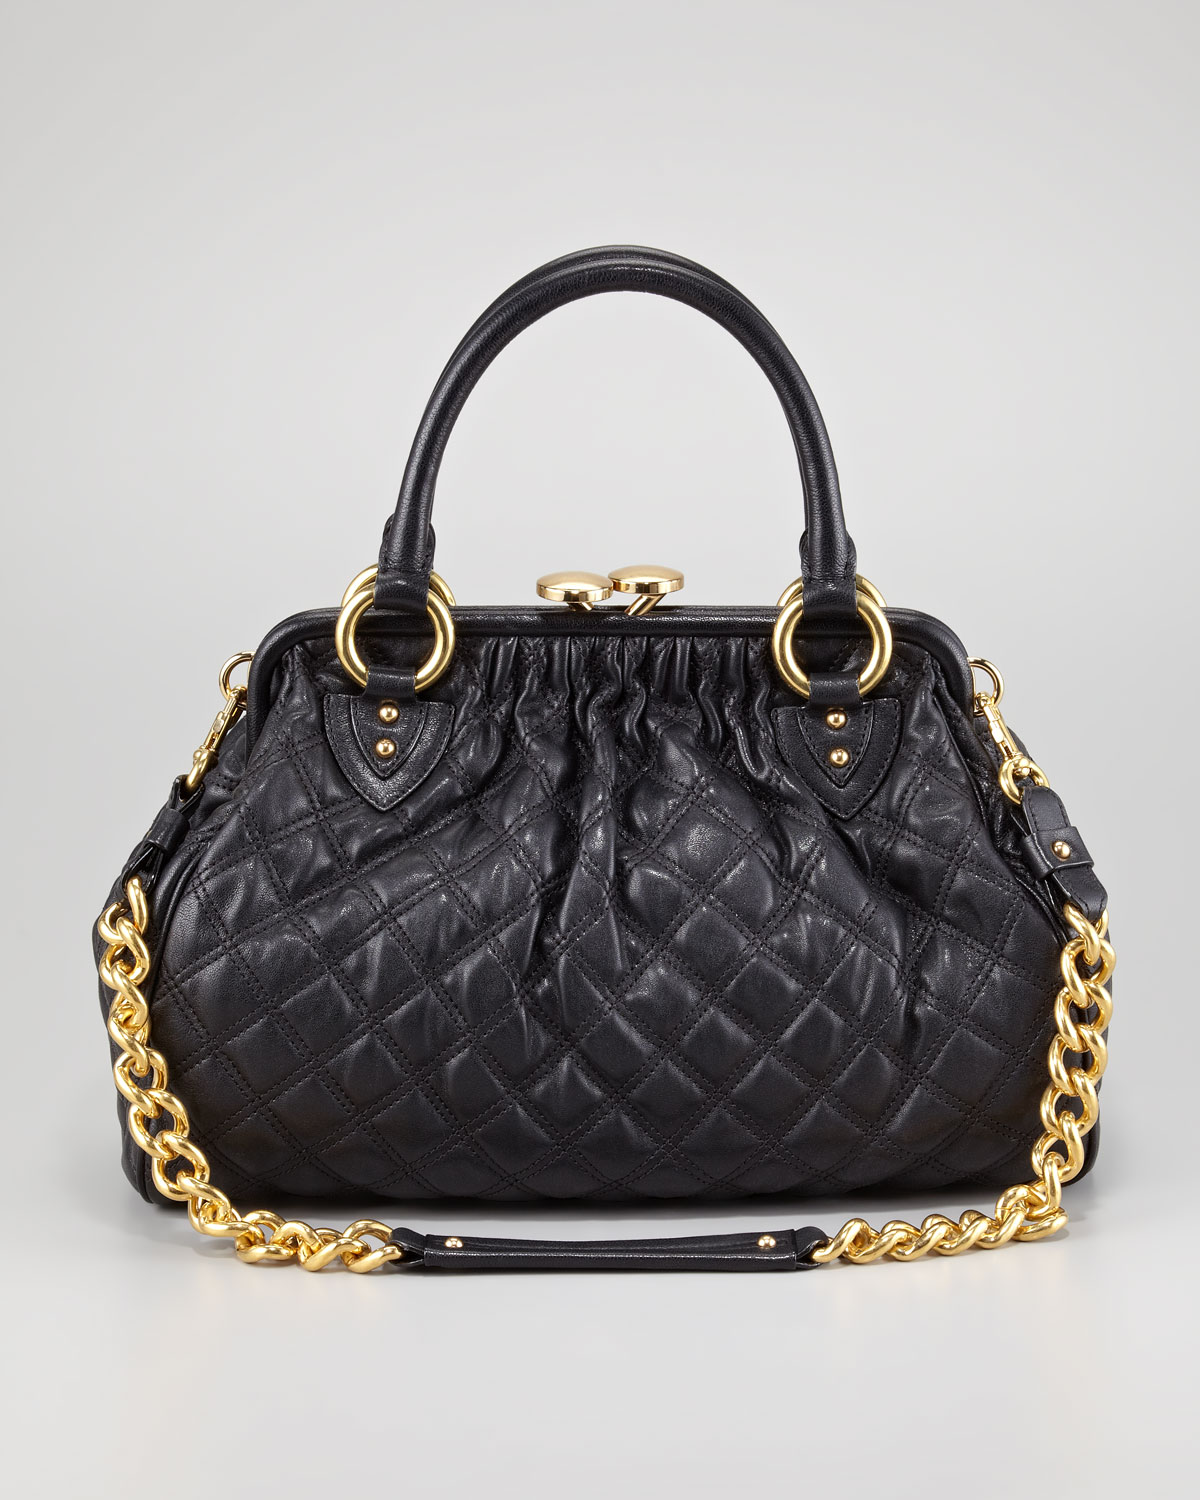 Marc Jacobs Stam Quilted Leather Satchel Bag in Black - Lyst